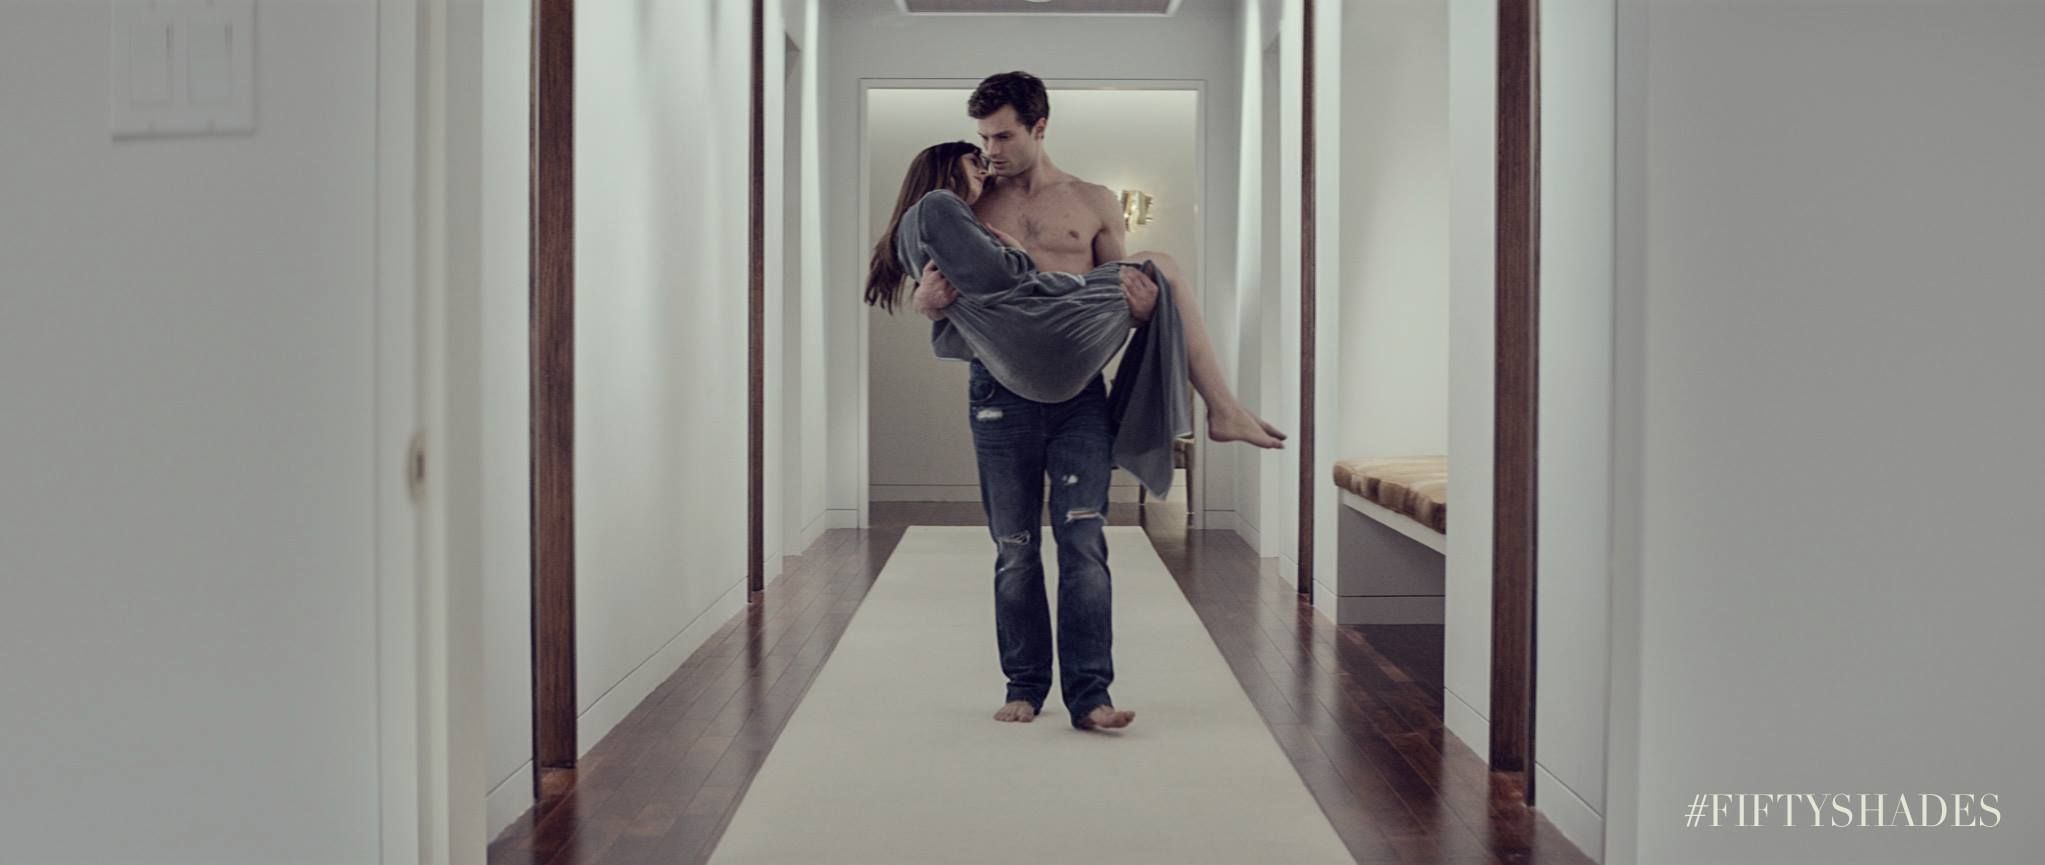 You Can Do Better Than Fifty Shades of Grey This Valentines - Yanko Design